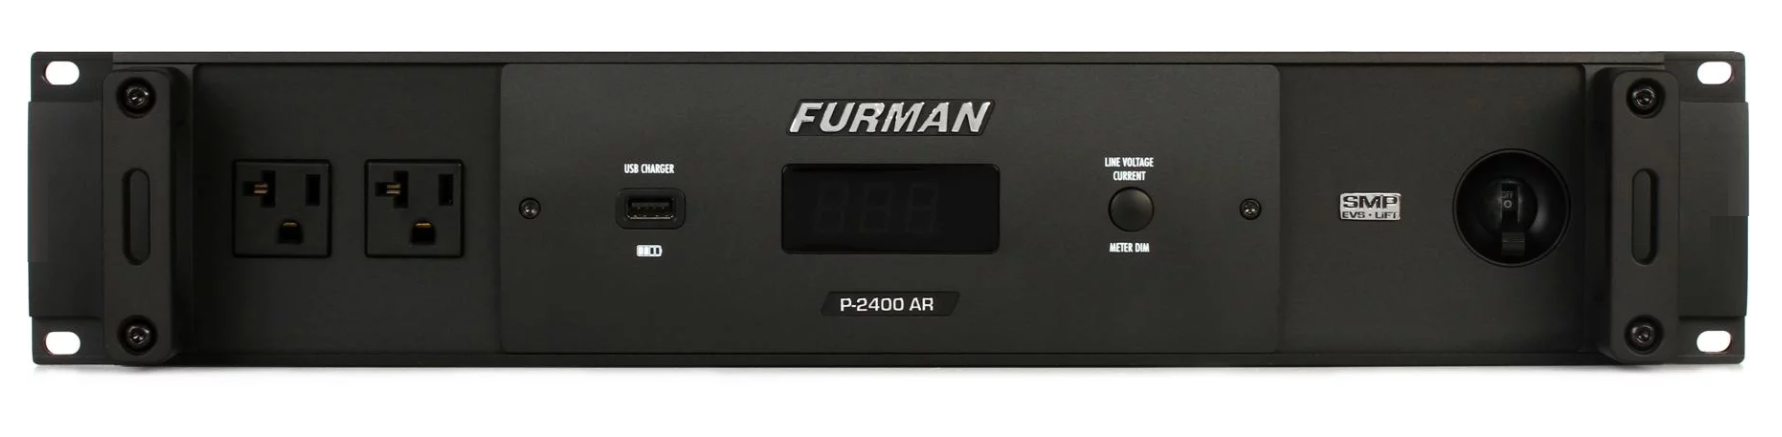 furman-p-2400-ar--voltage-regulator-and-power-conditioner.png